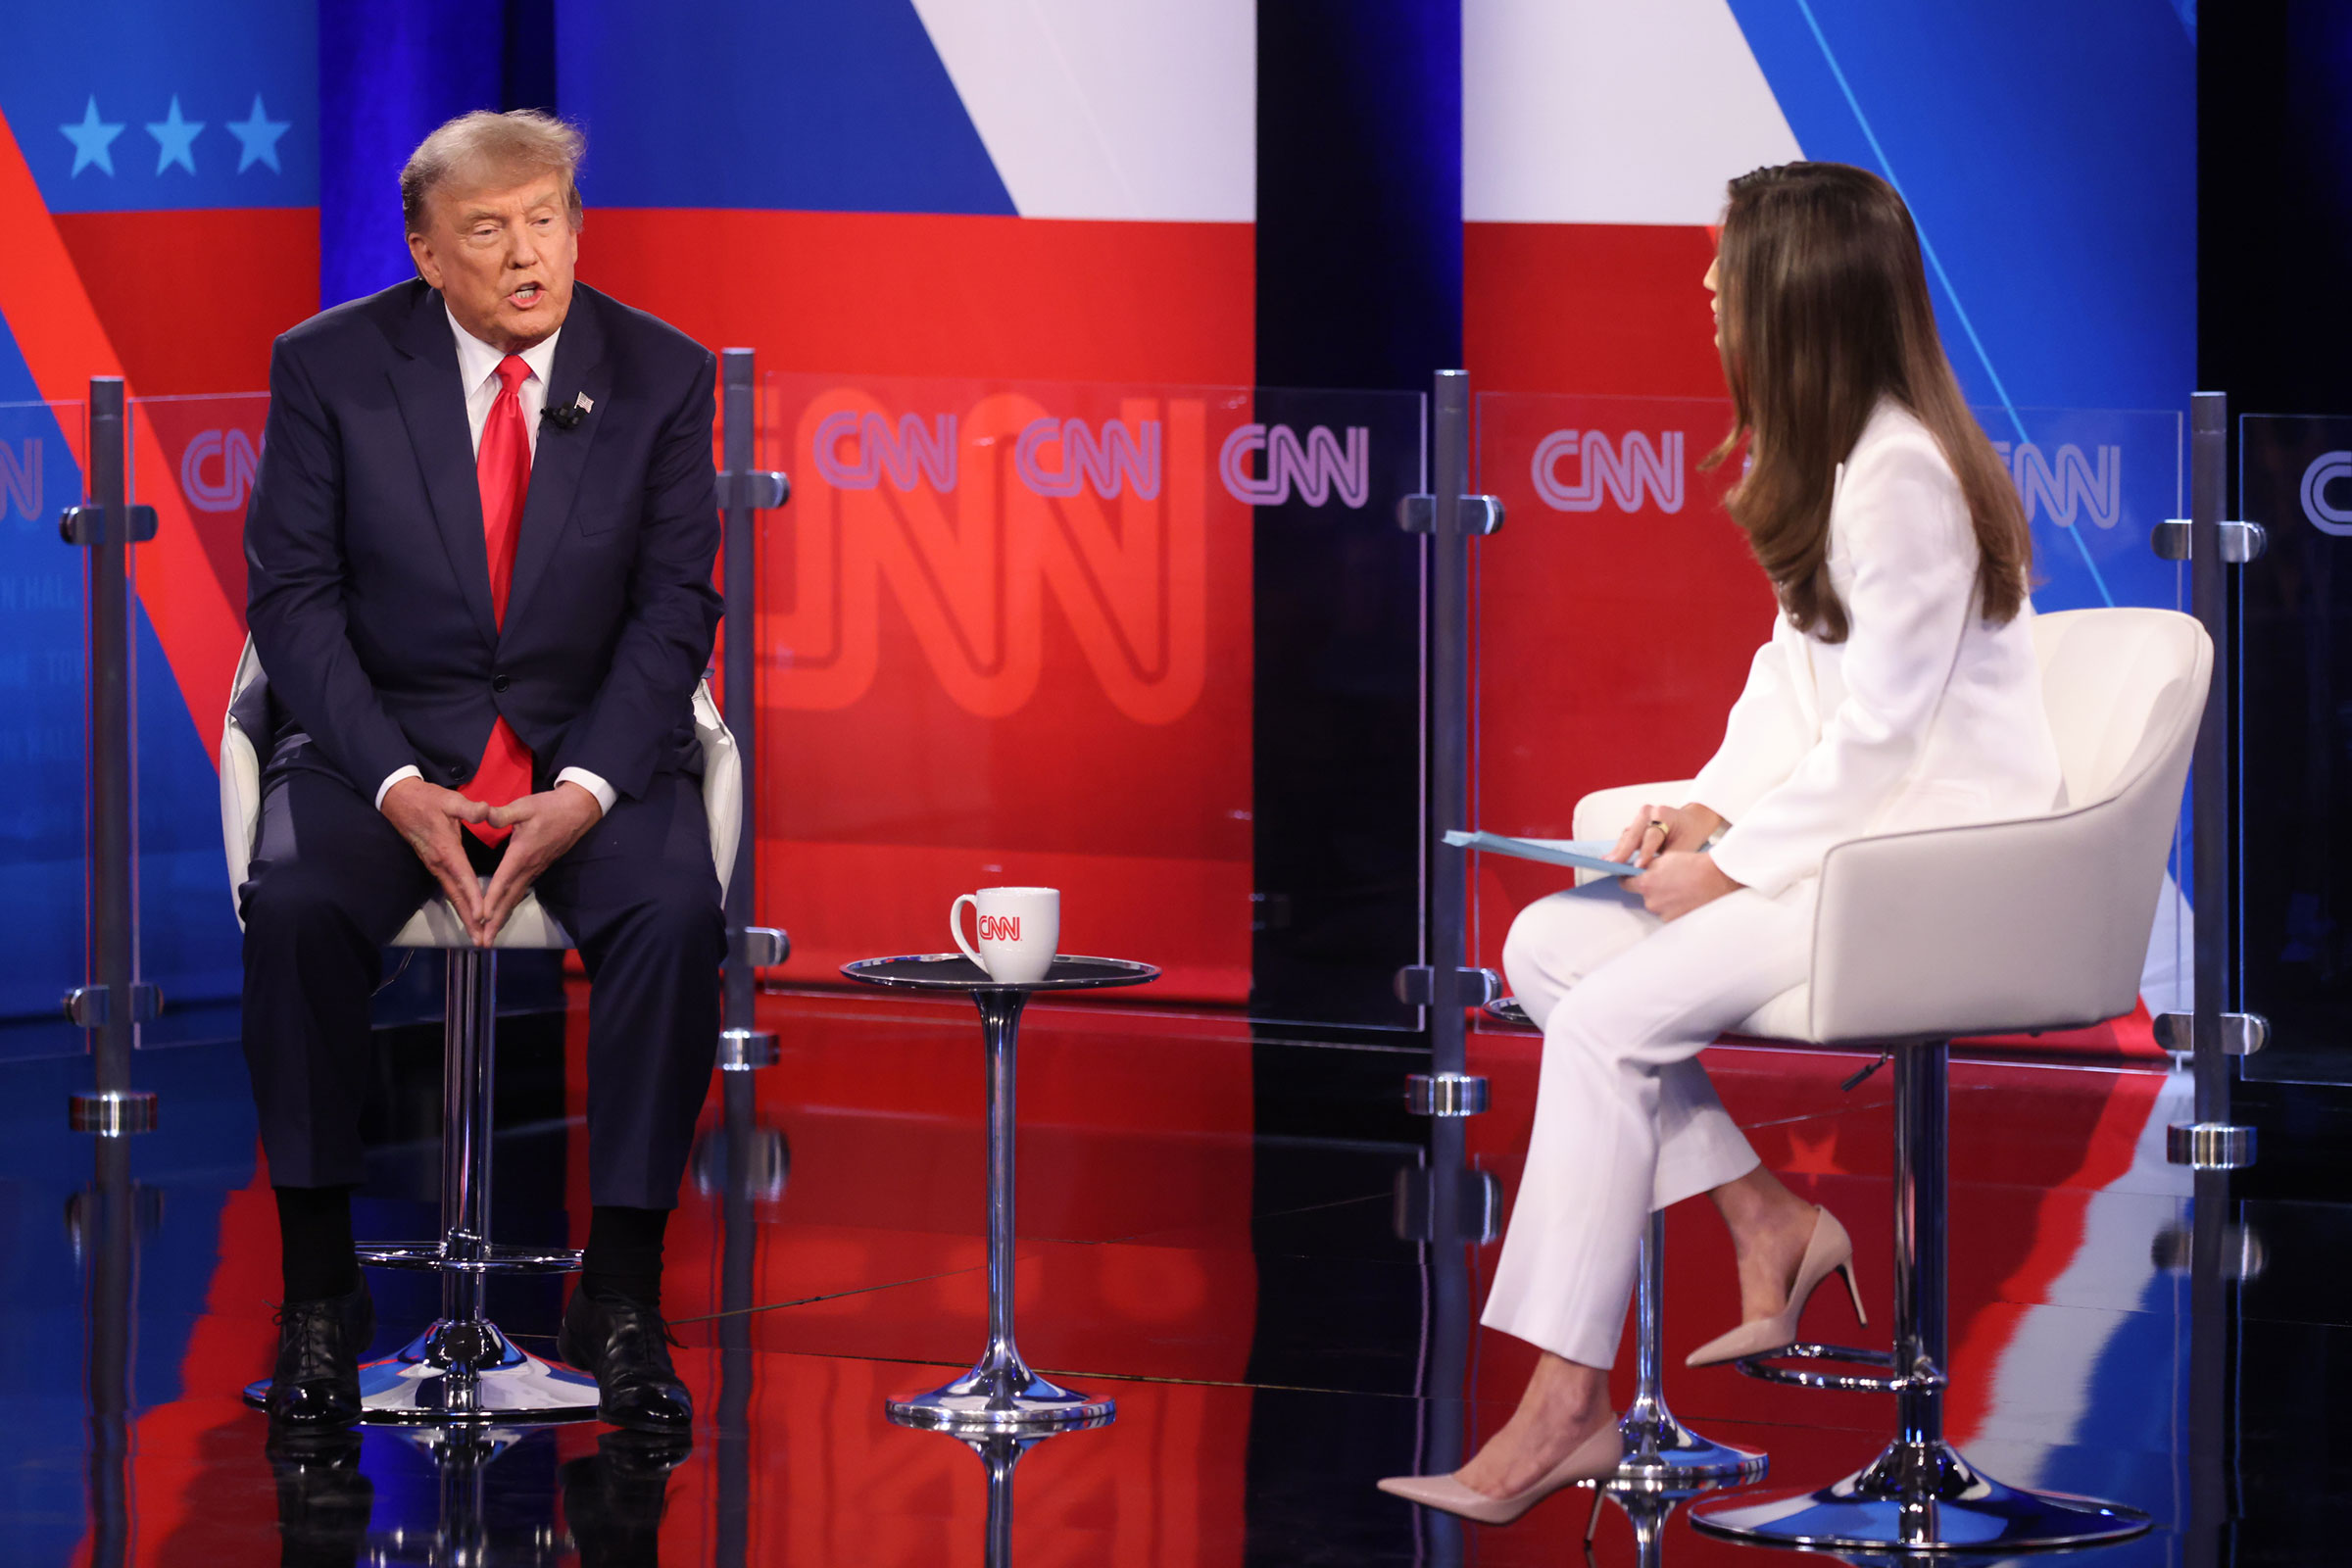 Former President Donald Trump participates in a CNN Republican Town Hall moderated by CNN’s Kaitlan Collins at St. Anselm College in Manchester, New Hampshire.